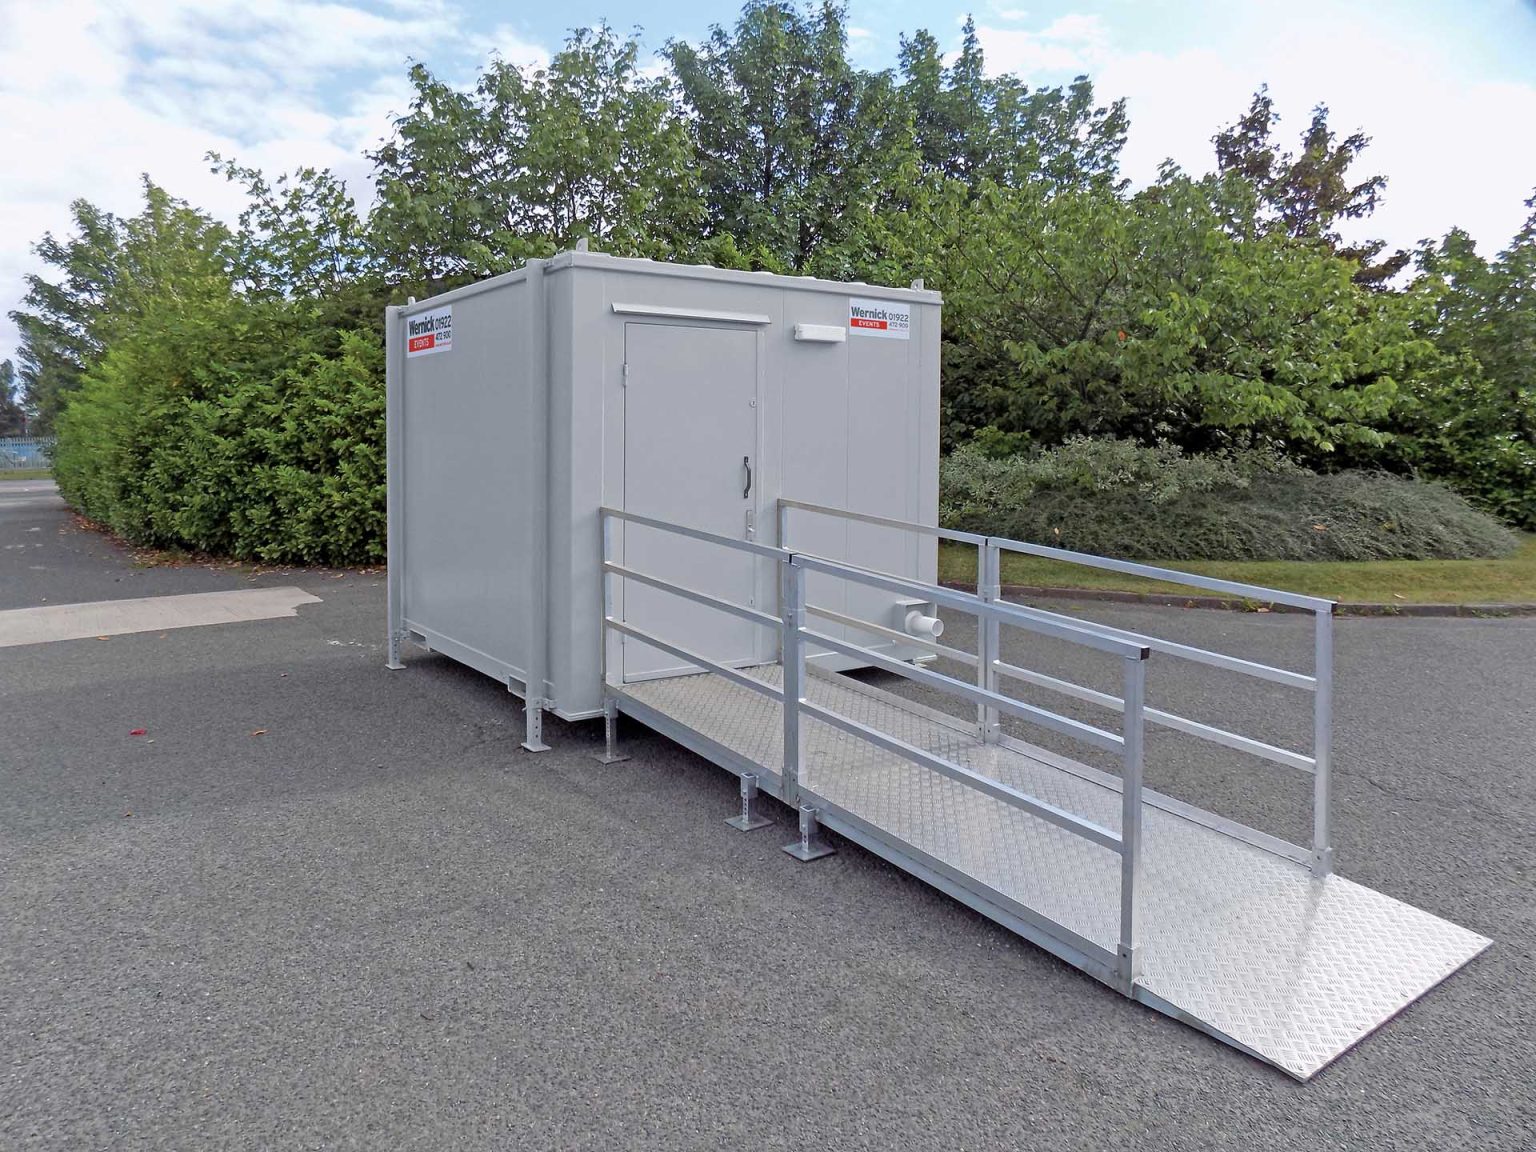 The importance of accessible facilities at events